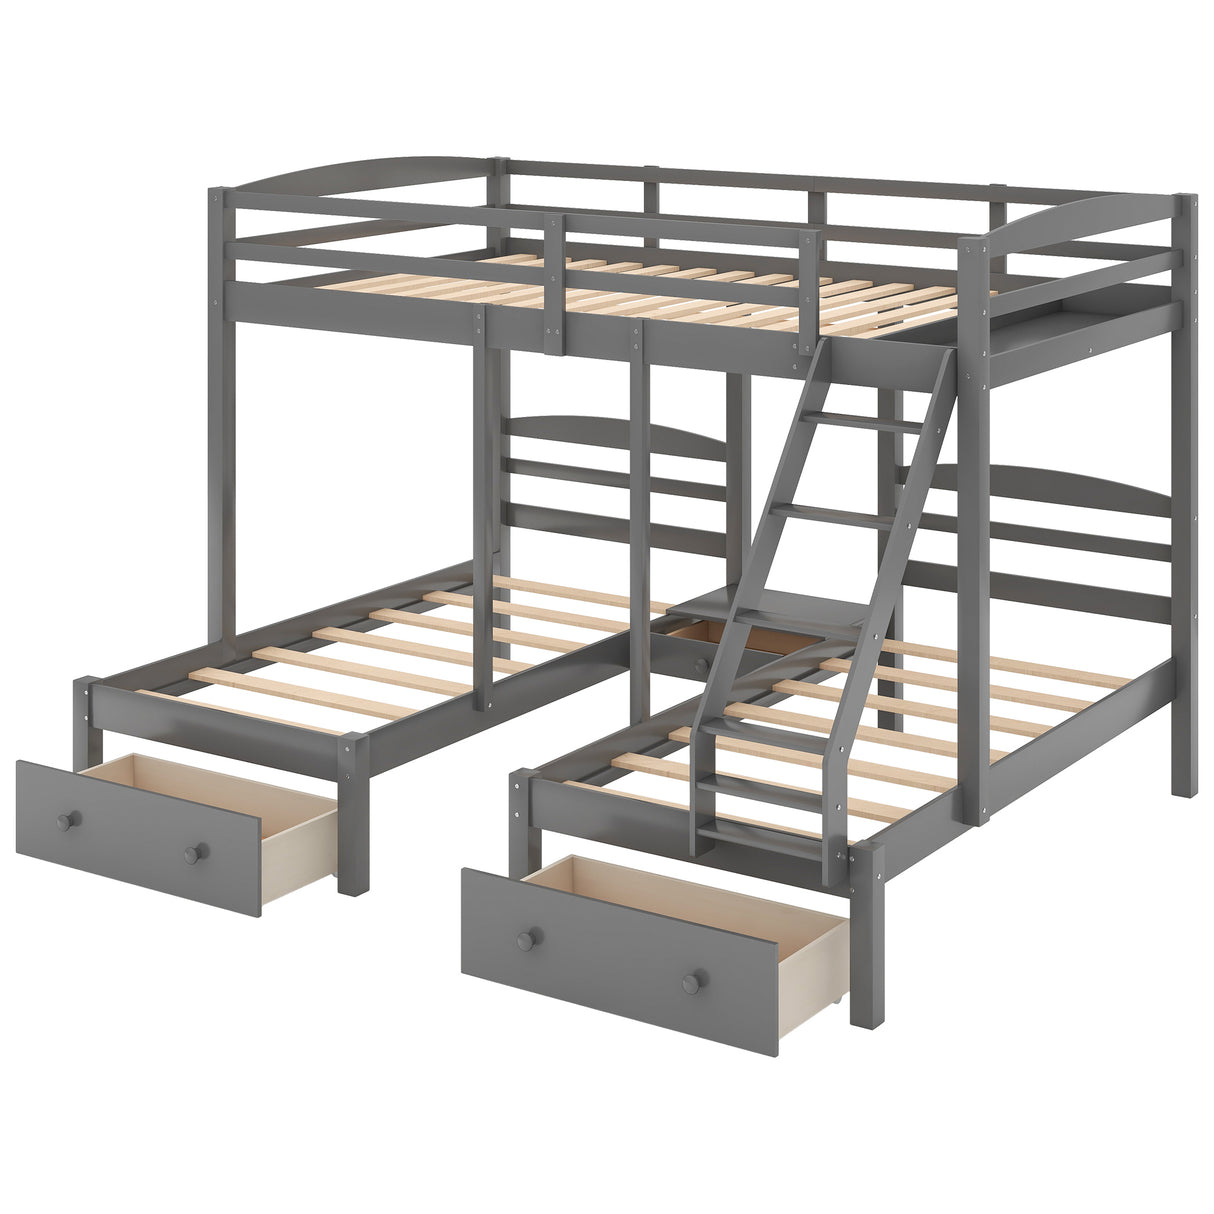 Full over Twin & Twin Bunk Bed,Triple Bunk Bed with Drawers, Gray - Home Elegance USA